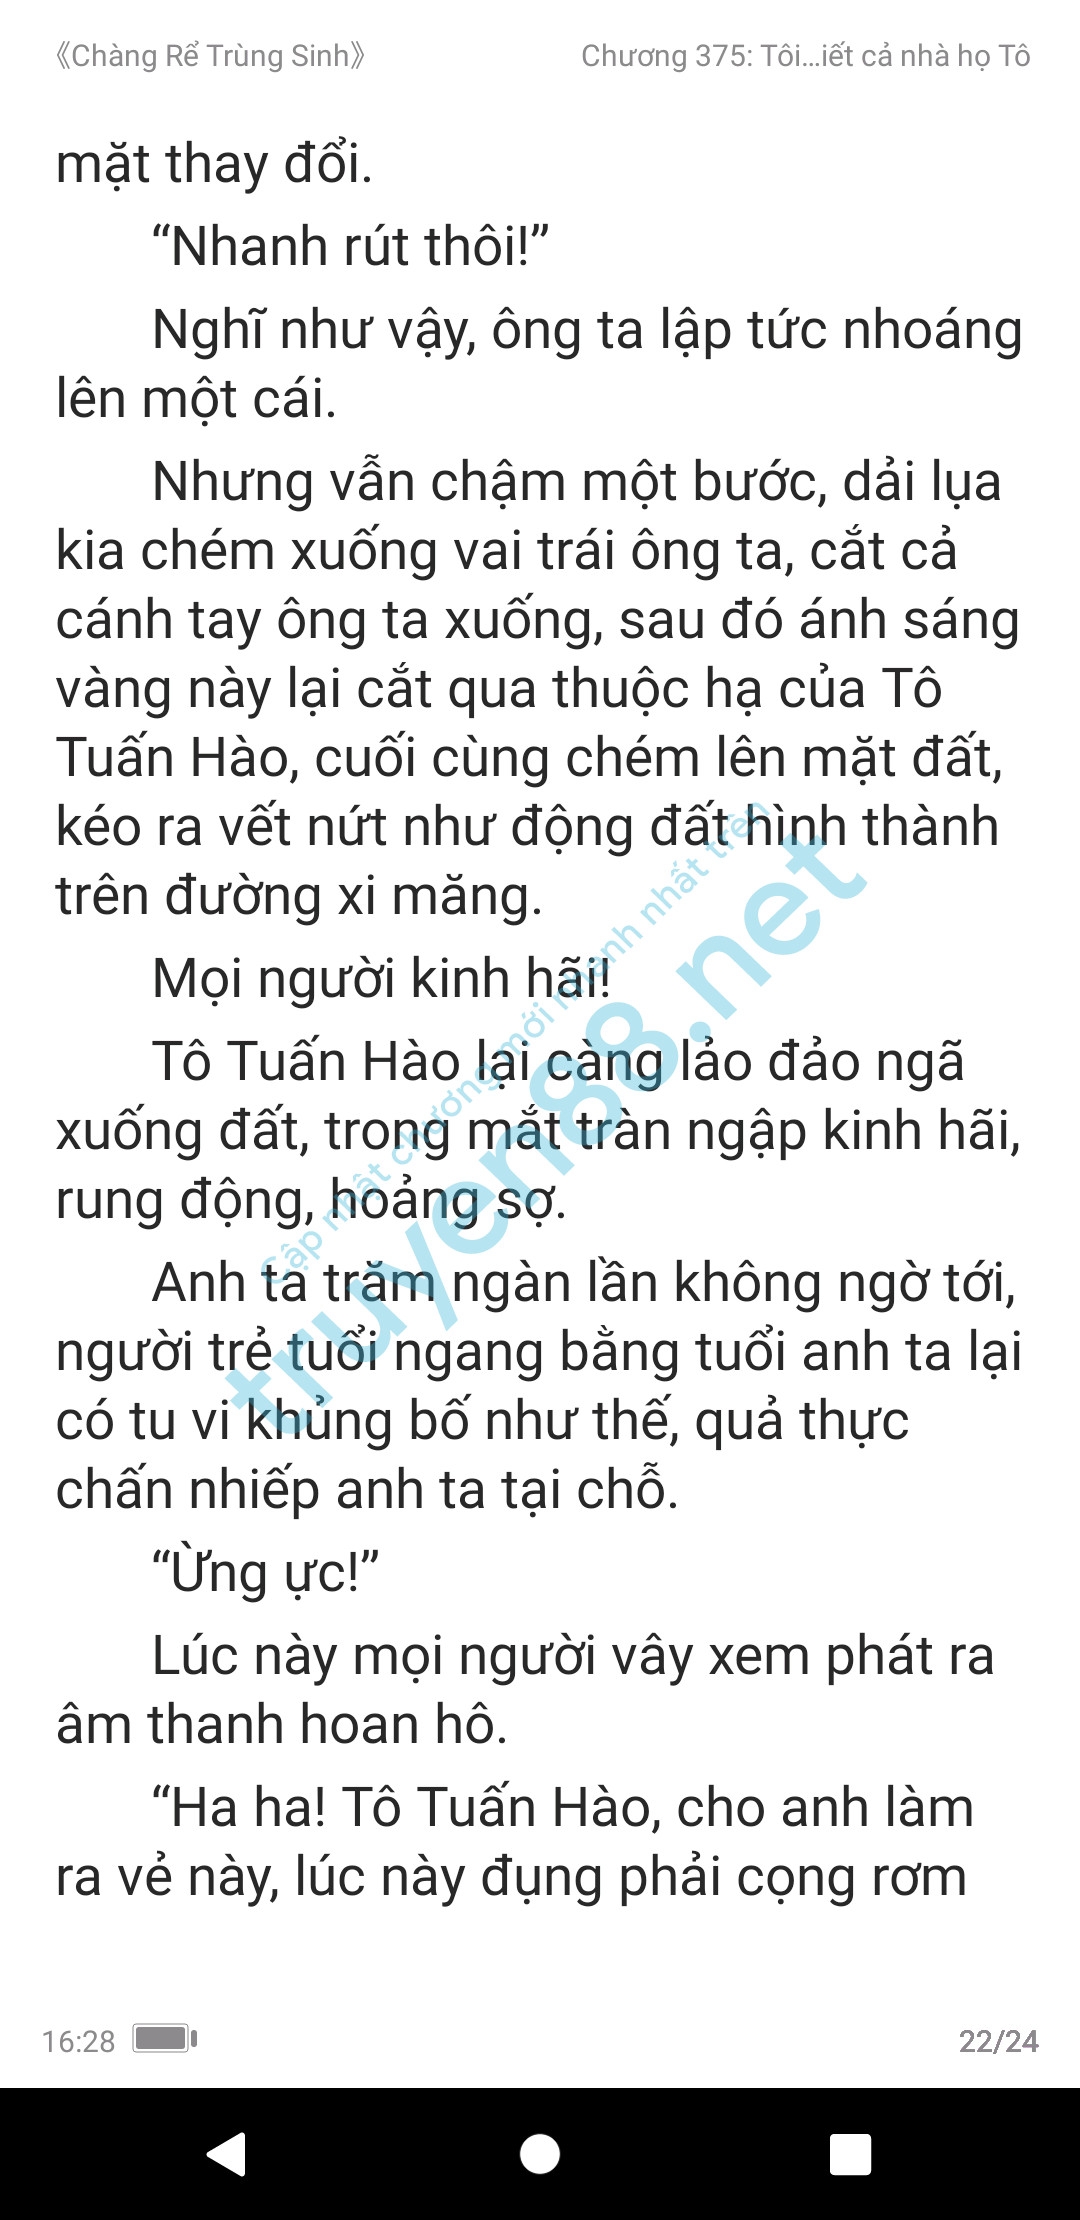 chang-re-trung-sinh-375-1